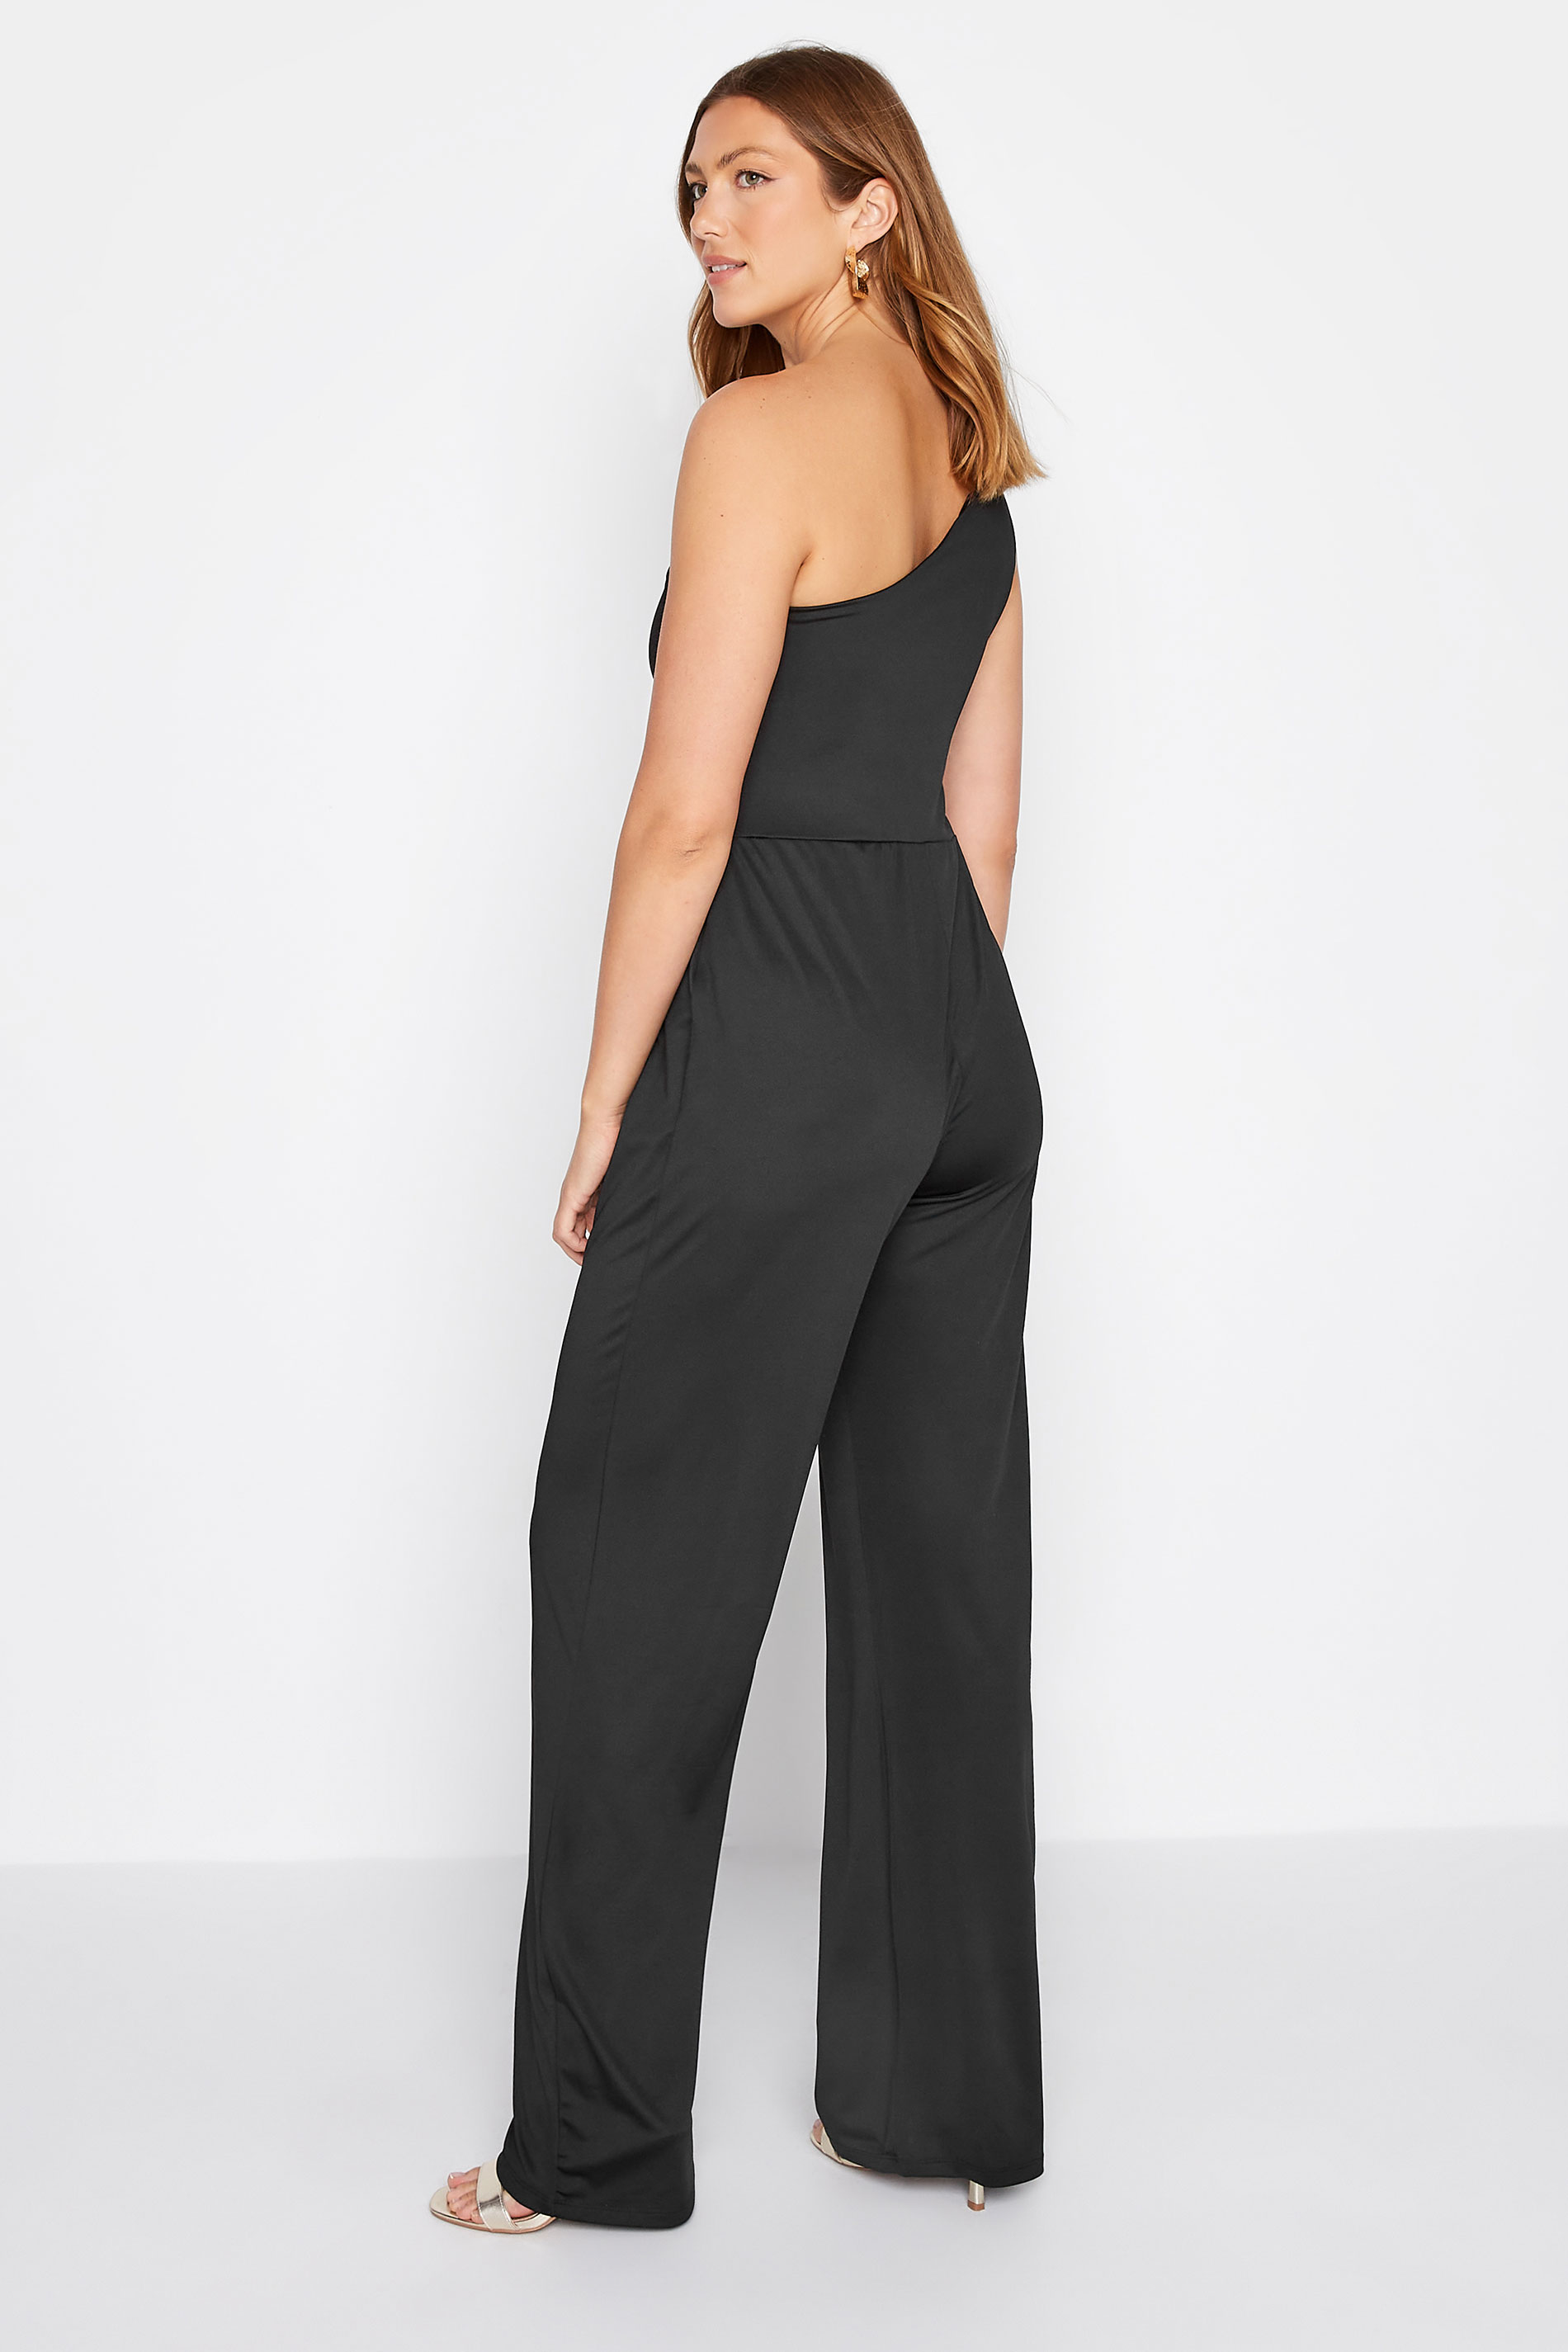 LTS Tall Women's Black Cold Shoulder Jumpsuit | Long Tall Sally  3